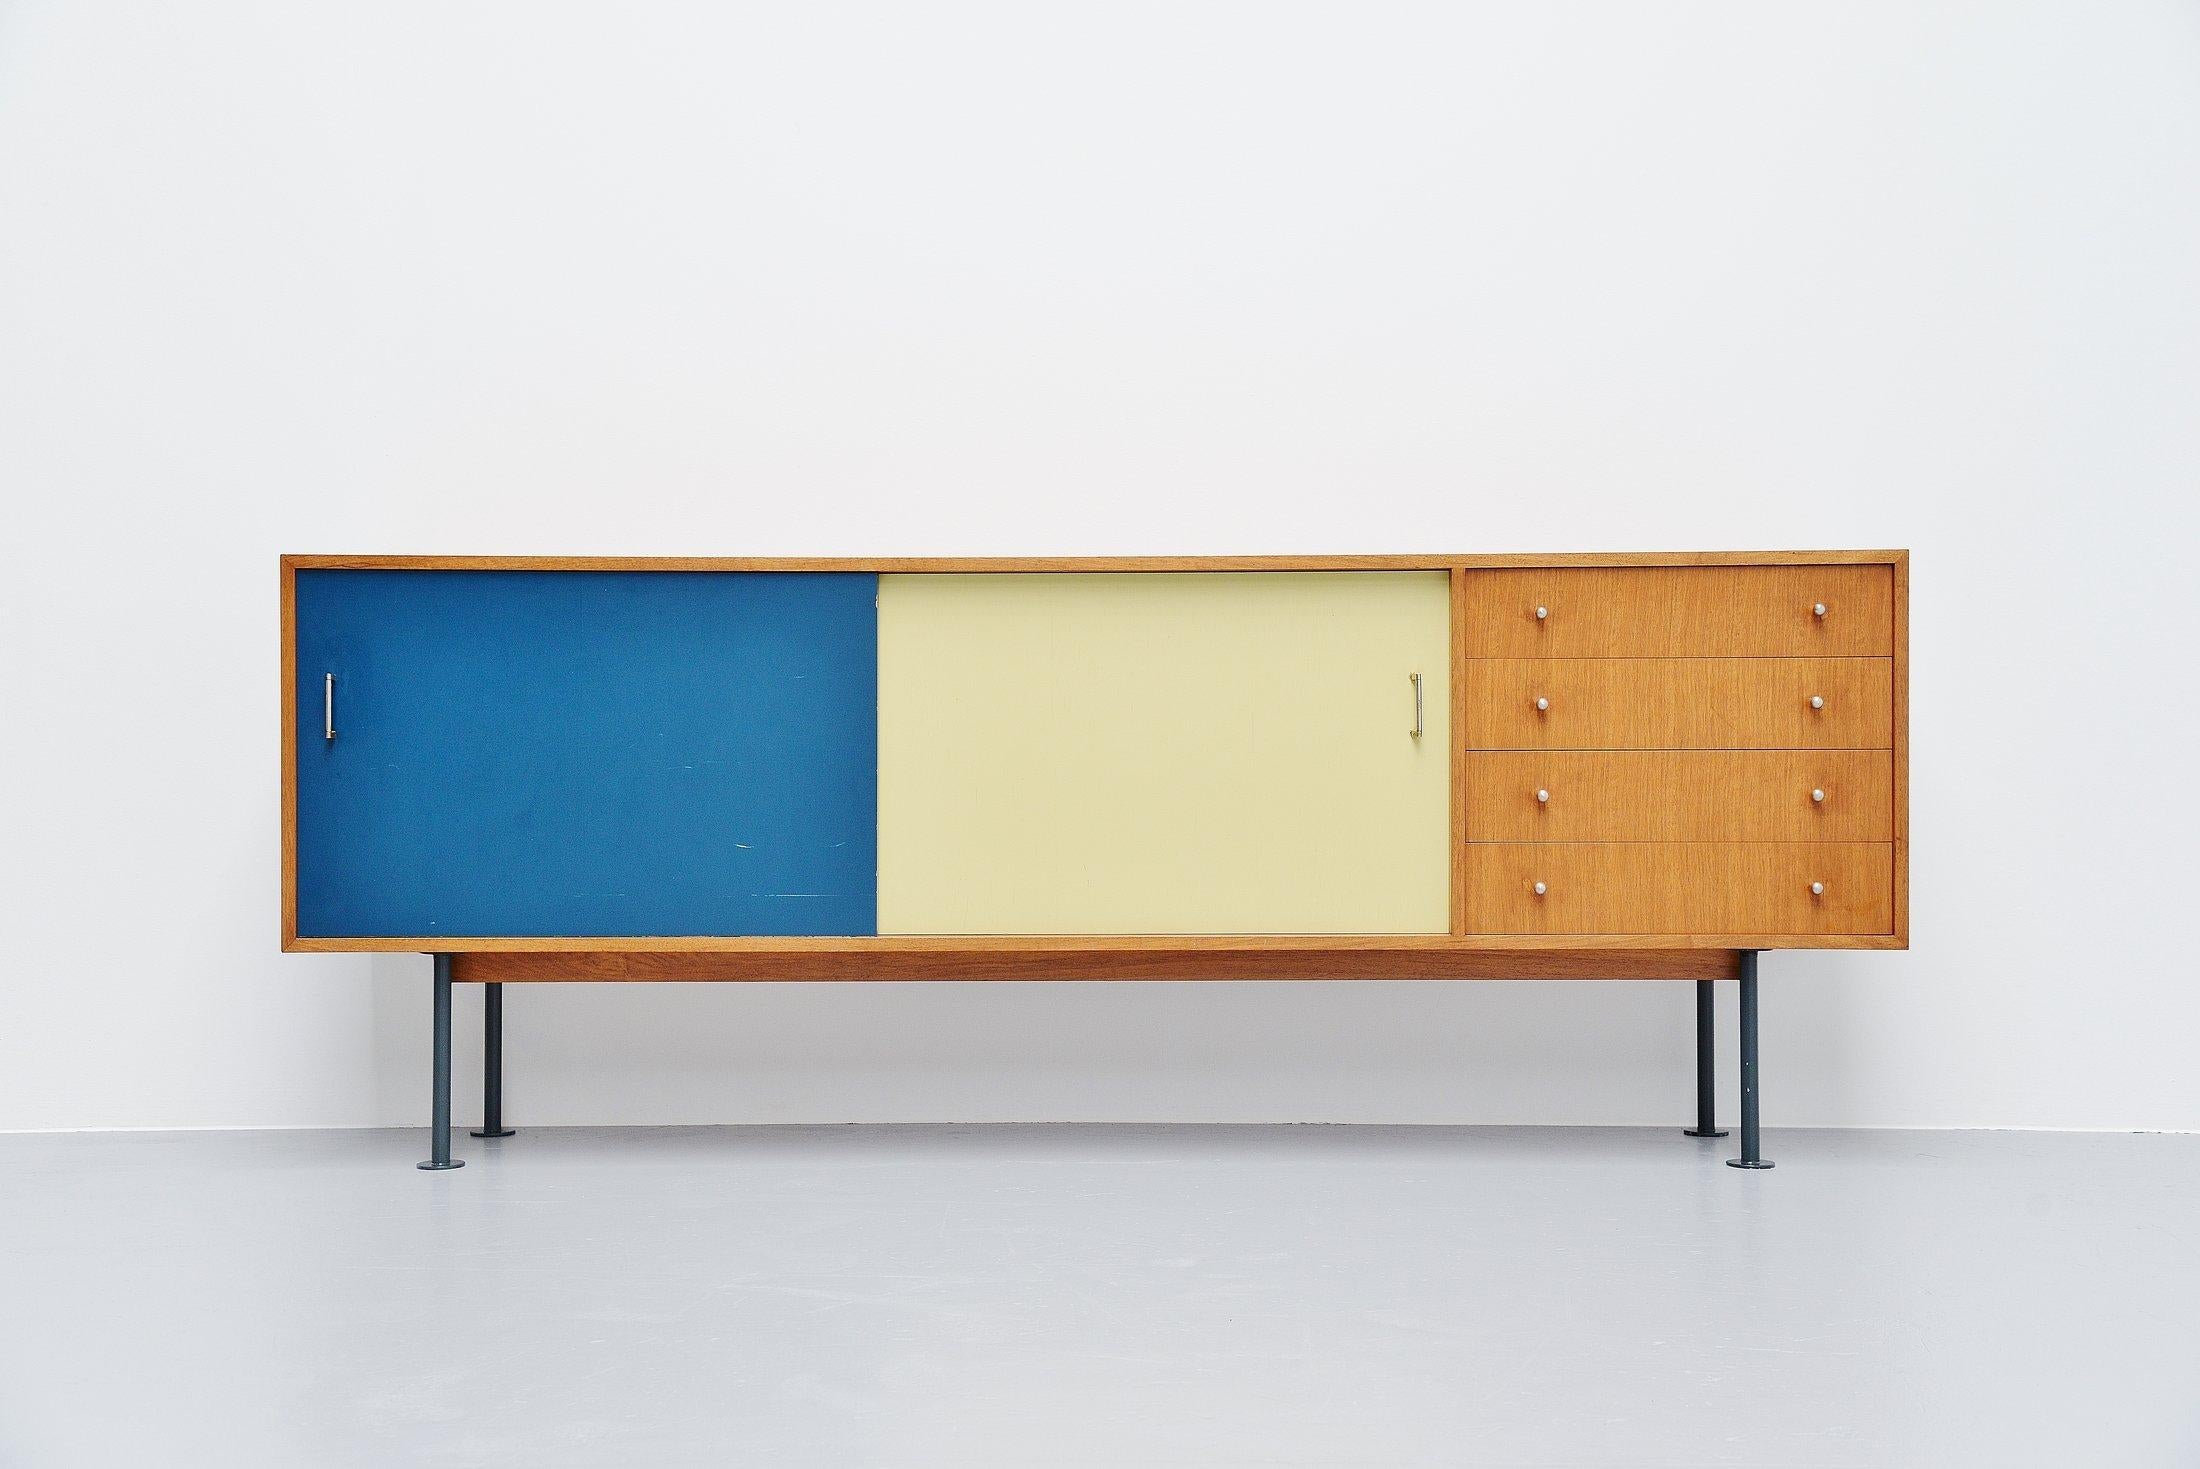 Fantastic modernist sideboard made by unknown designer or manufacturer, France, 1950. The sideboard is made of walnut wood and has yellow and blue sliding doors with a shelve behind. On the right there are 4 drawers. The legs are made of blue